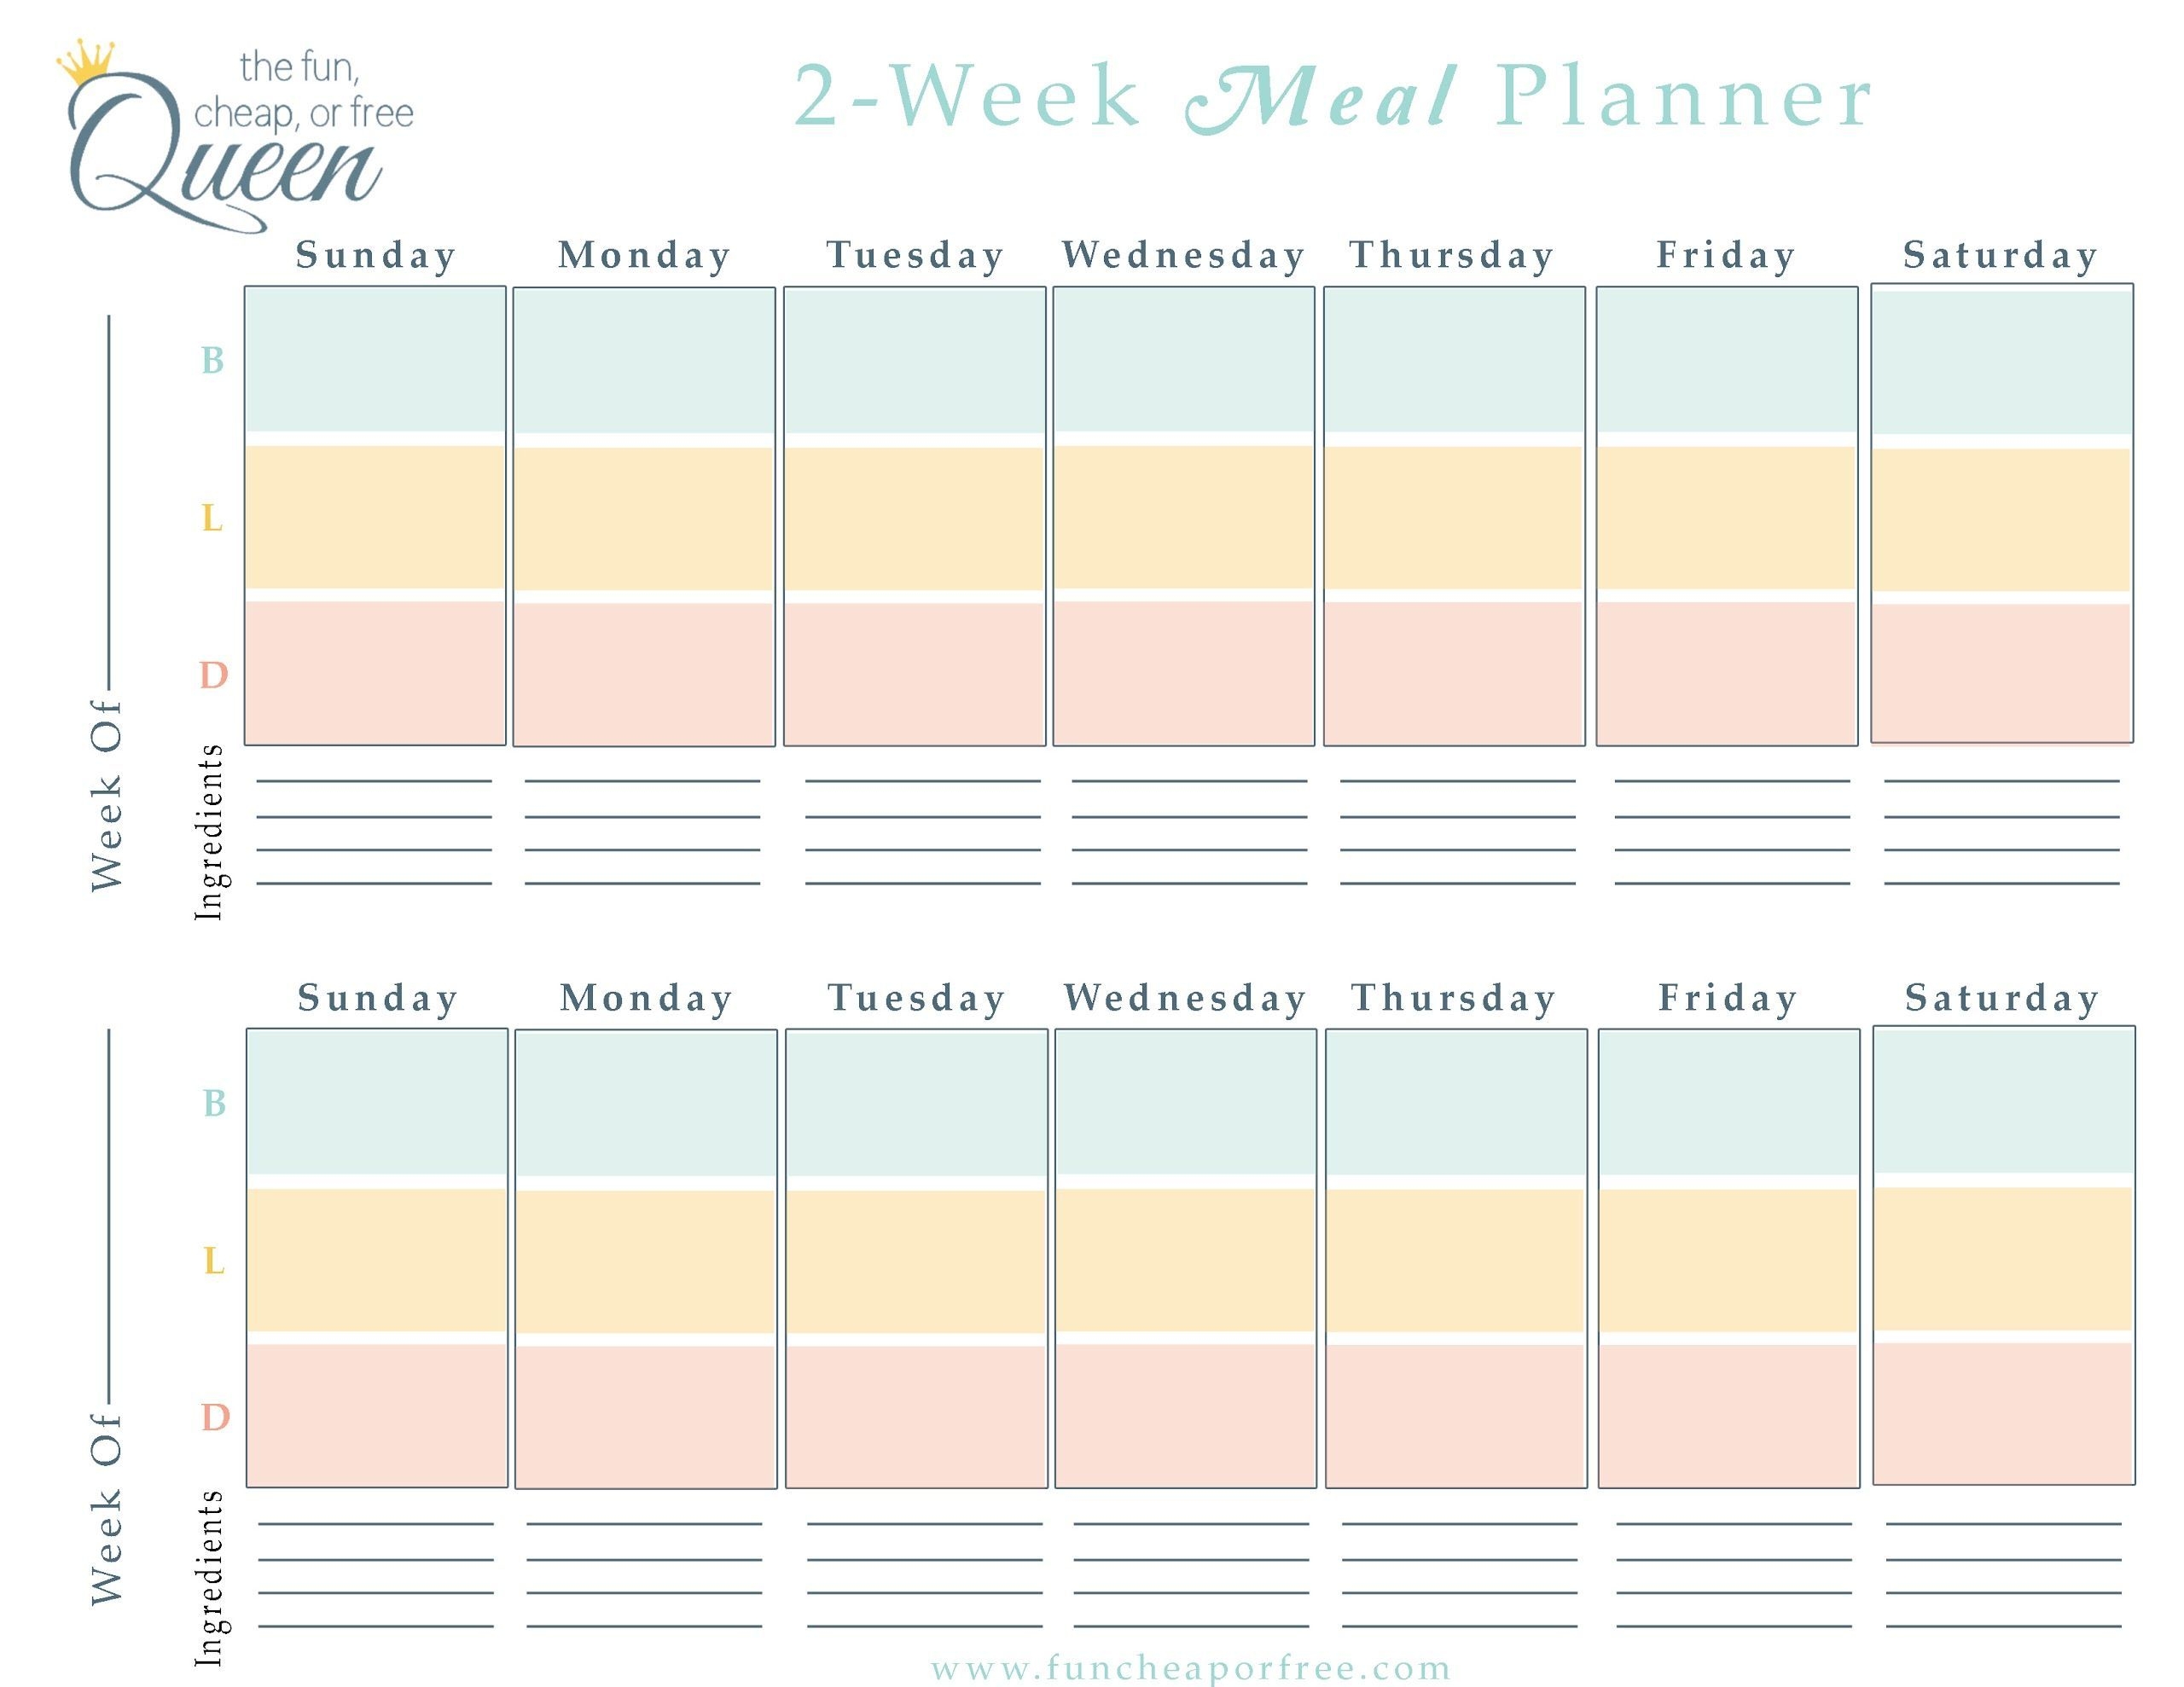 2-Week Meal Planner - Google Drive (With Images) | Meal